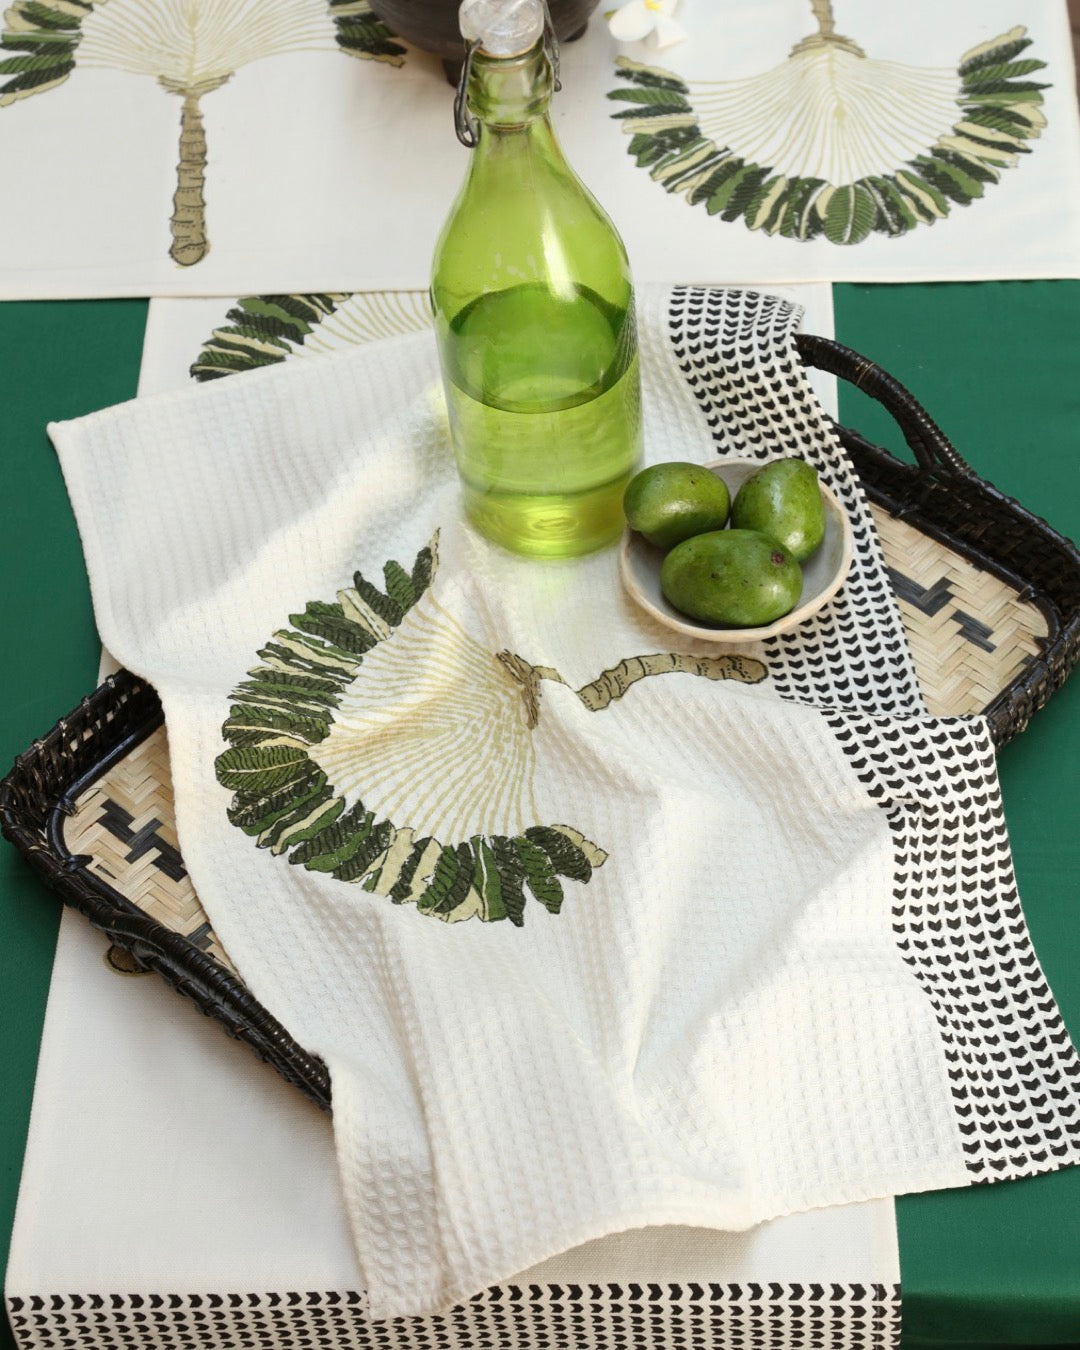 Traveller's palm tea towel with raw mangoes